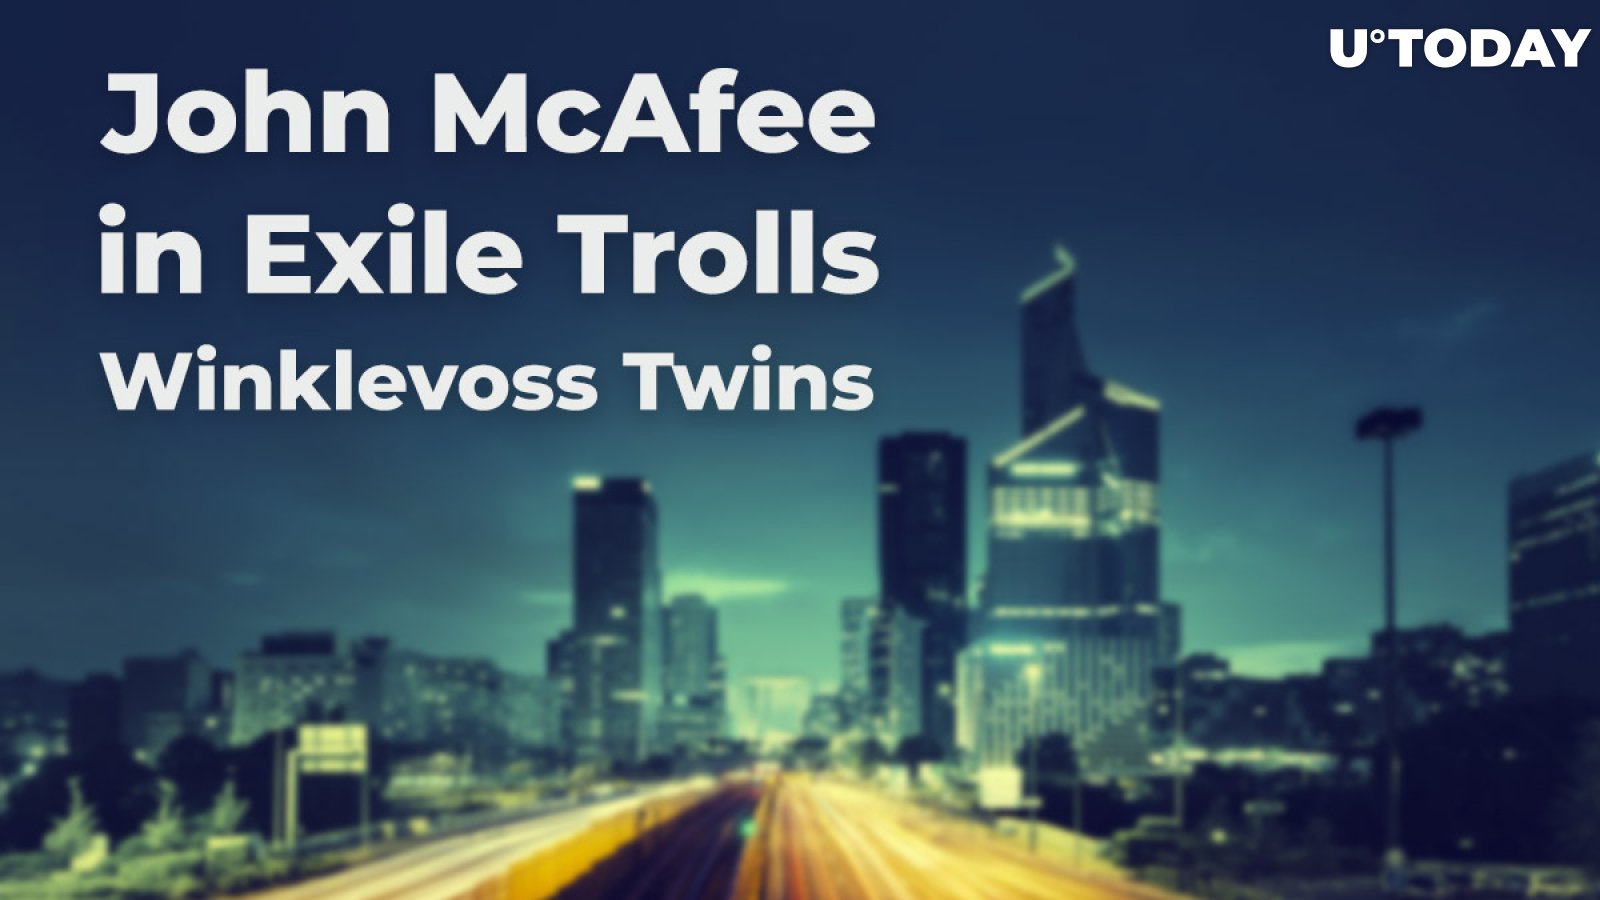 John McAfee in Exile Trolls Winklevoss Twins, Mocking Their Bitcoin Price Forecast